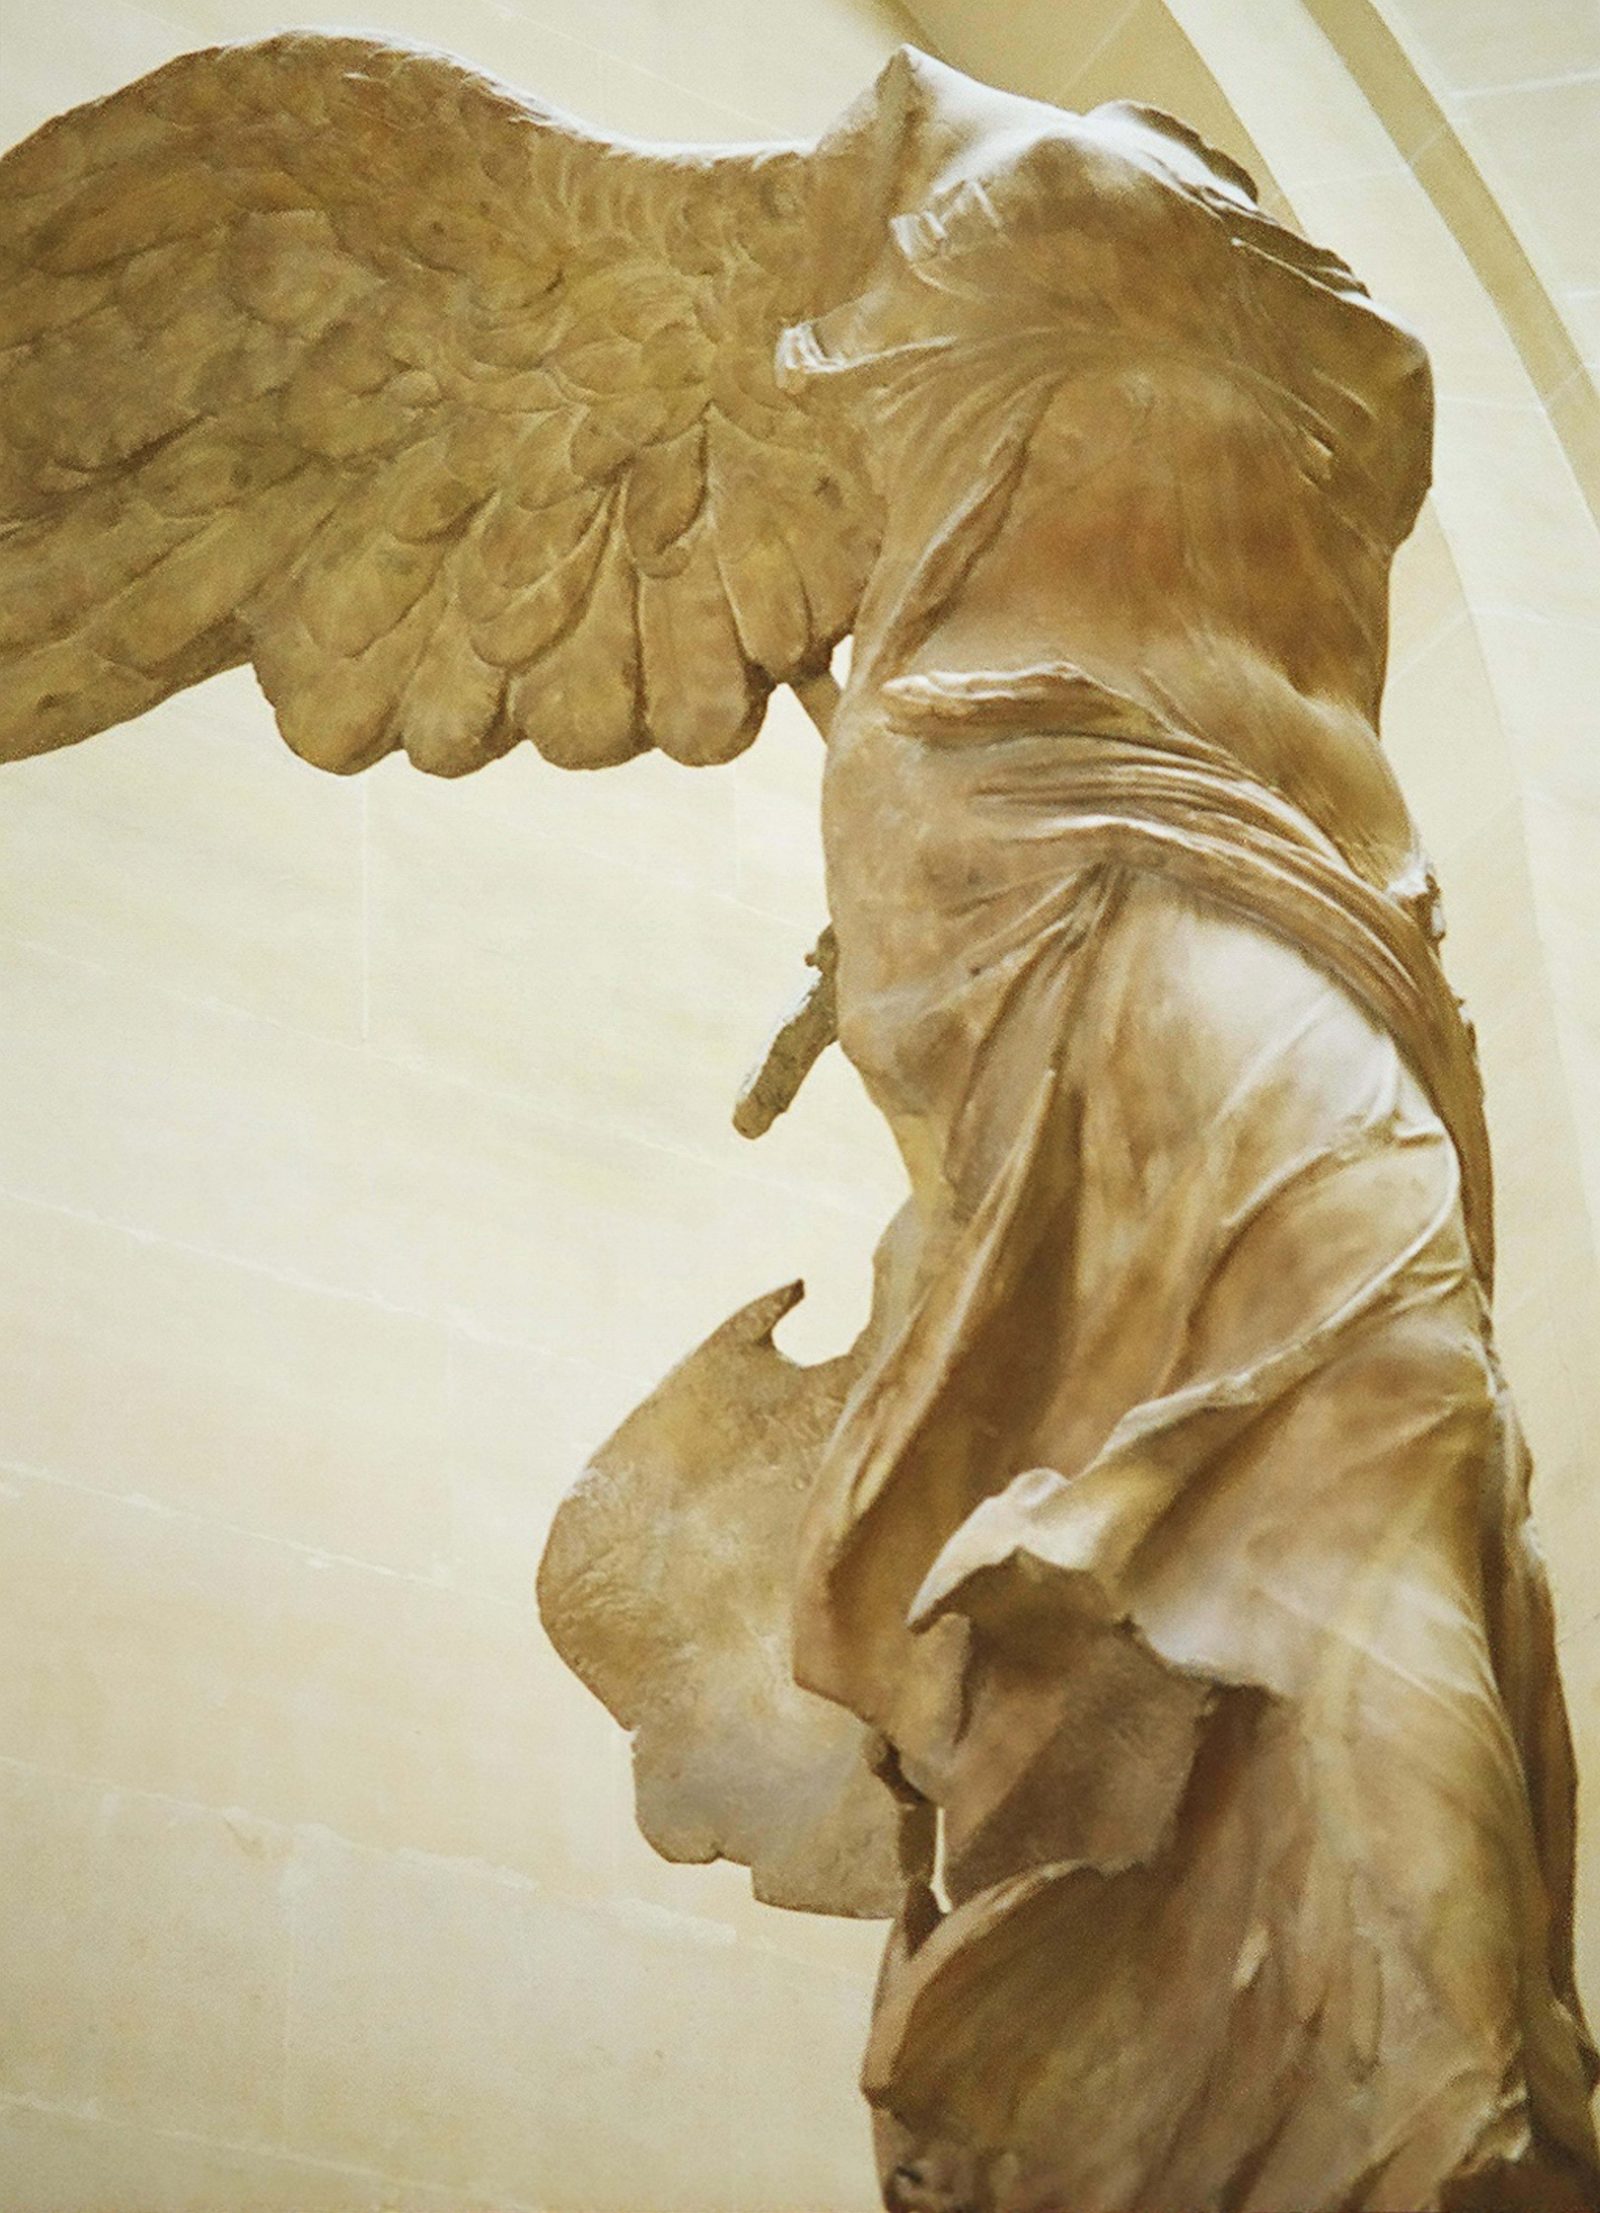 A winged sculpture of a woman.